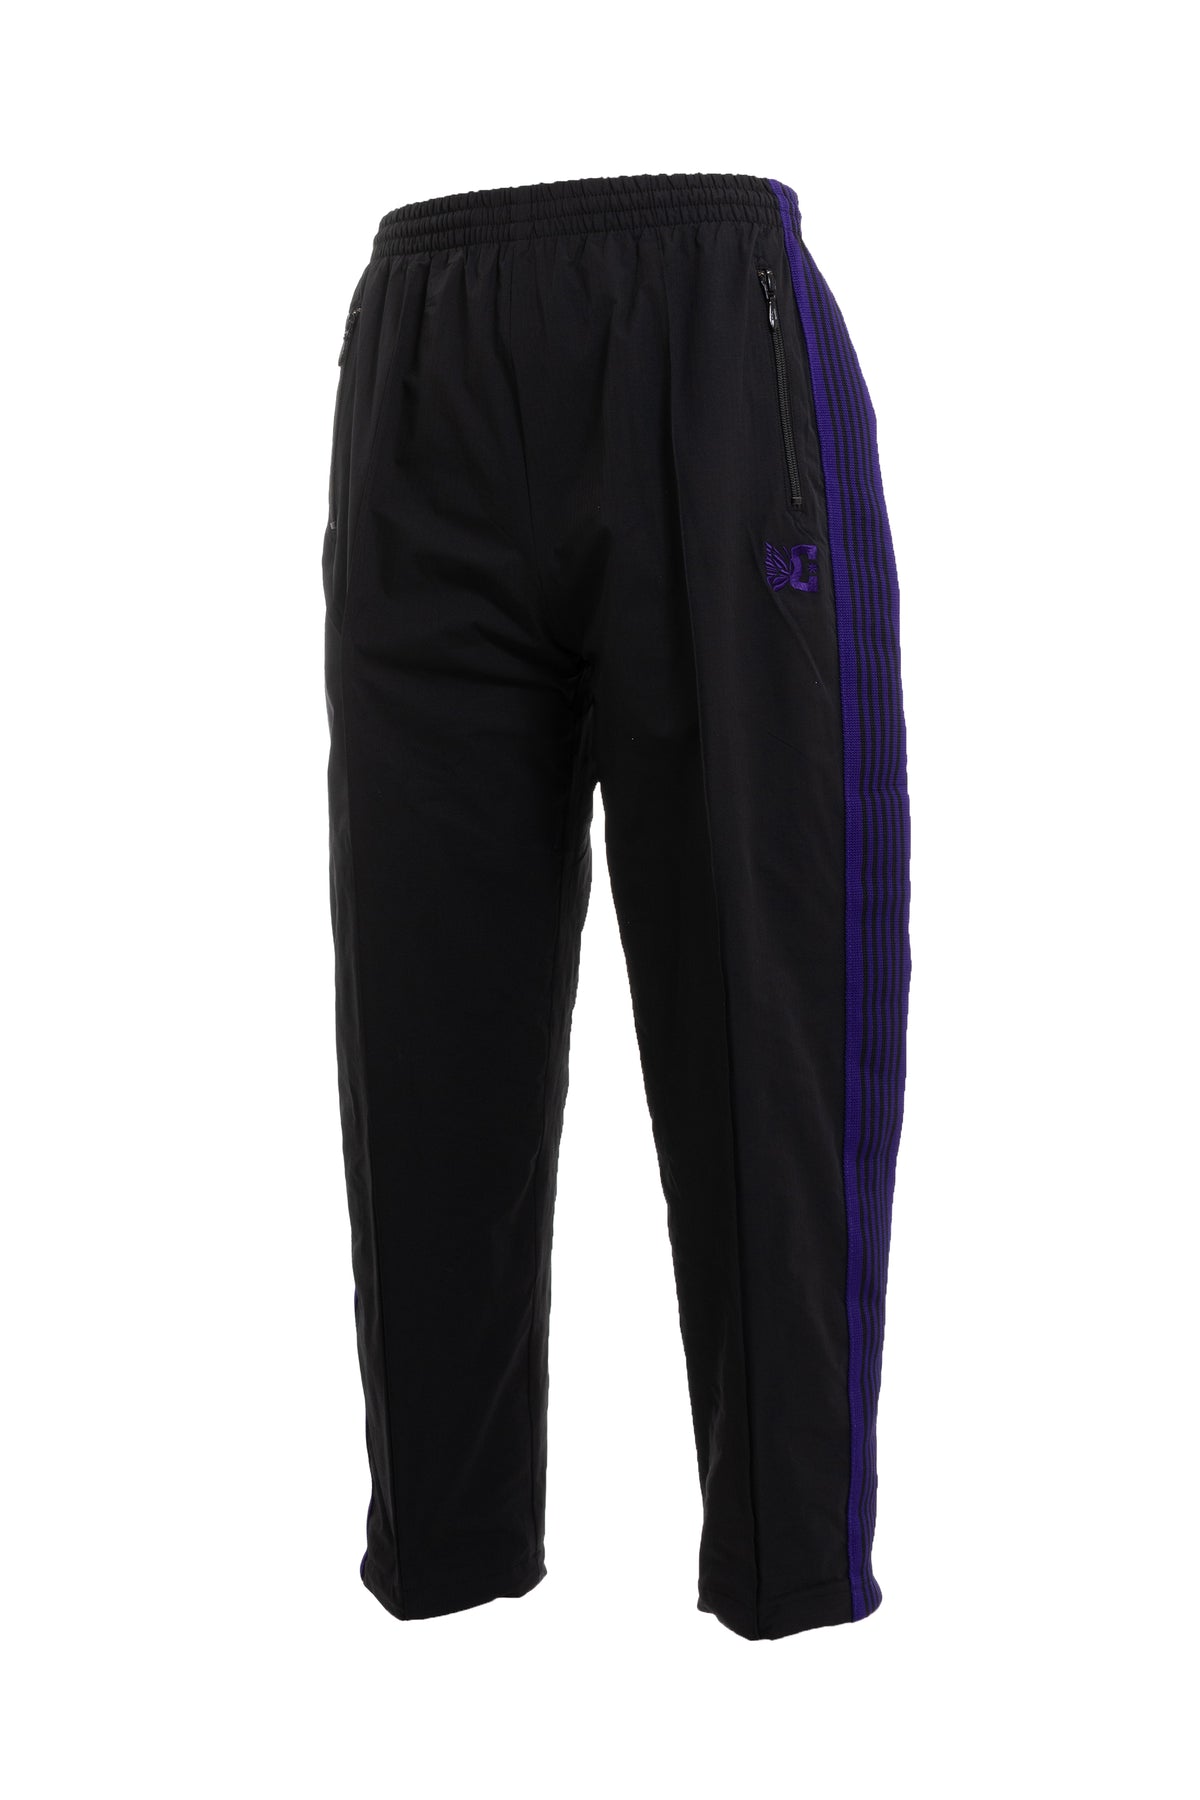 TRACK PANT - POLY RIPSTOP / BLK